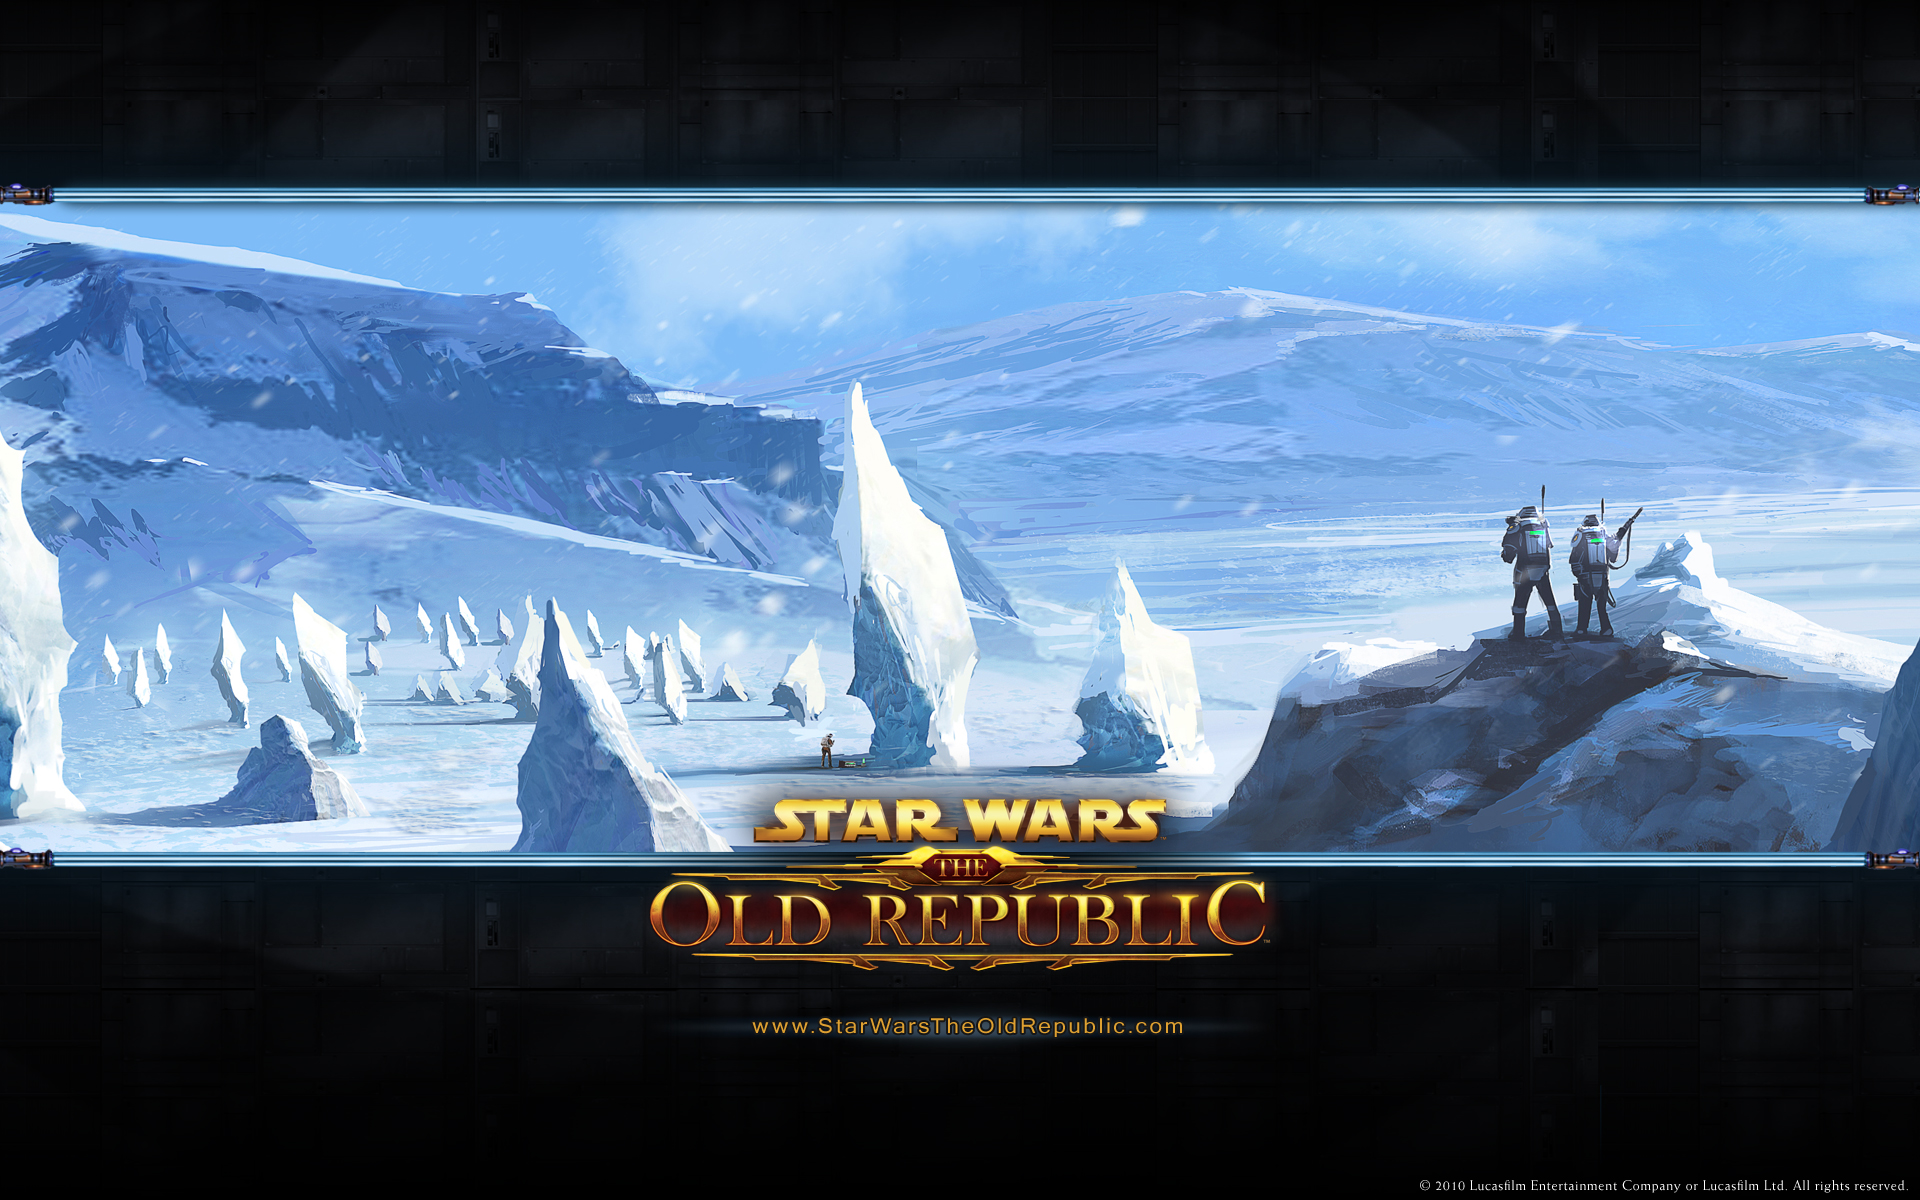 Get to know an MMO – Star Wars: The Old Republic